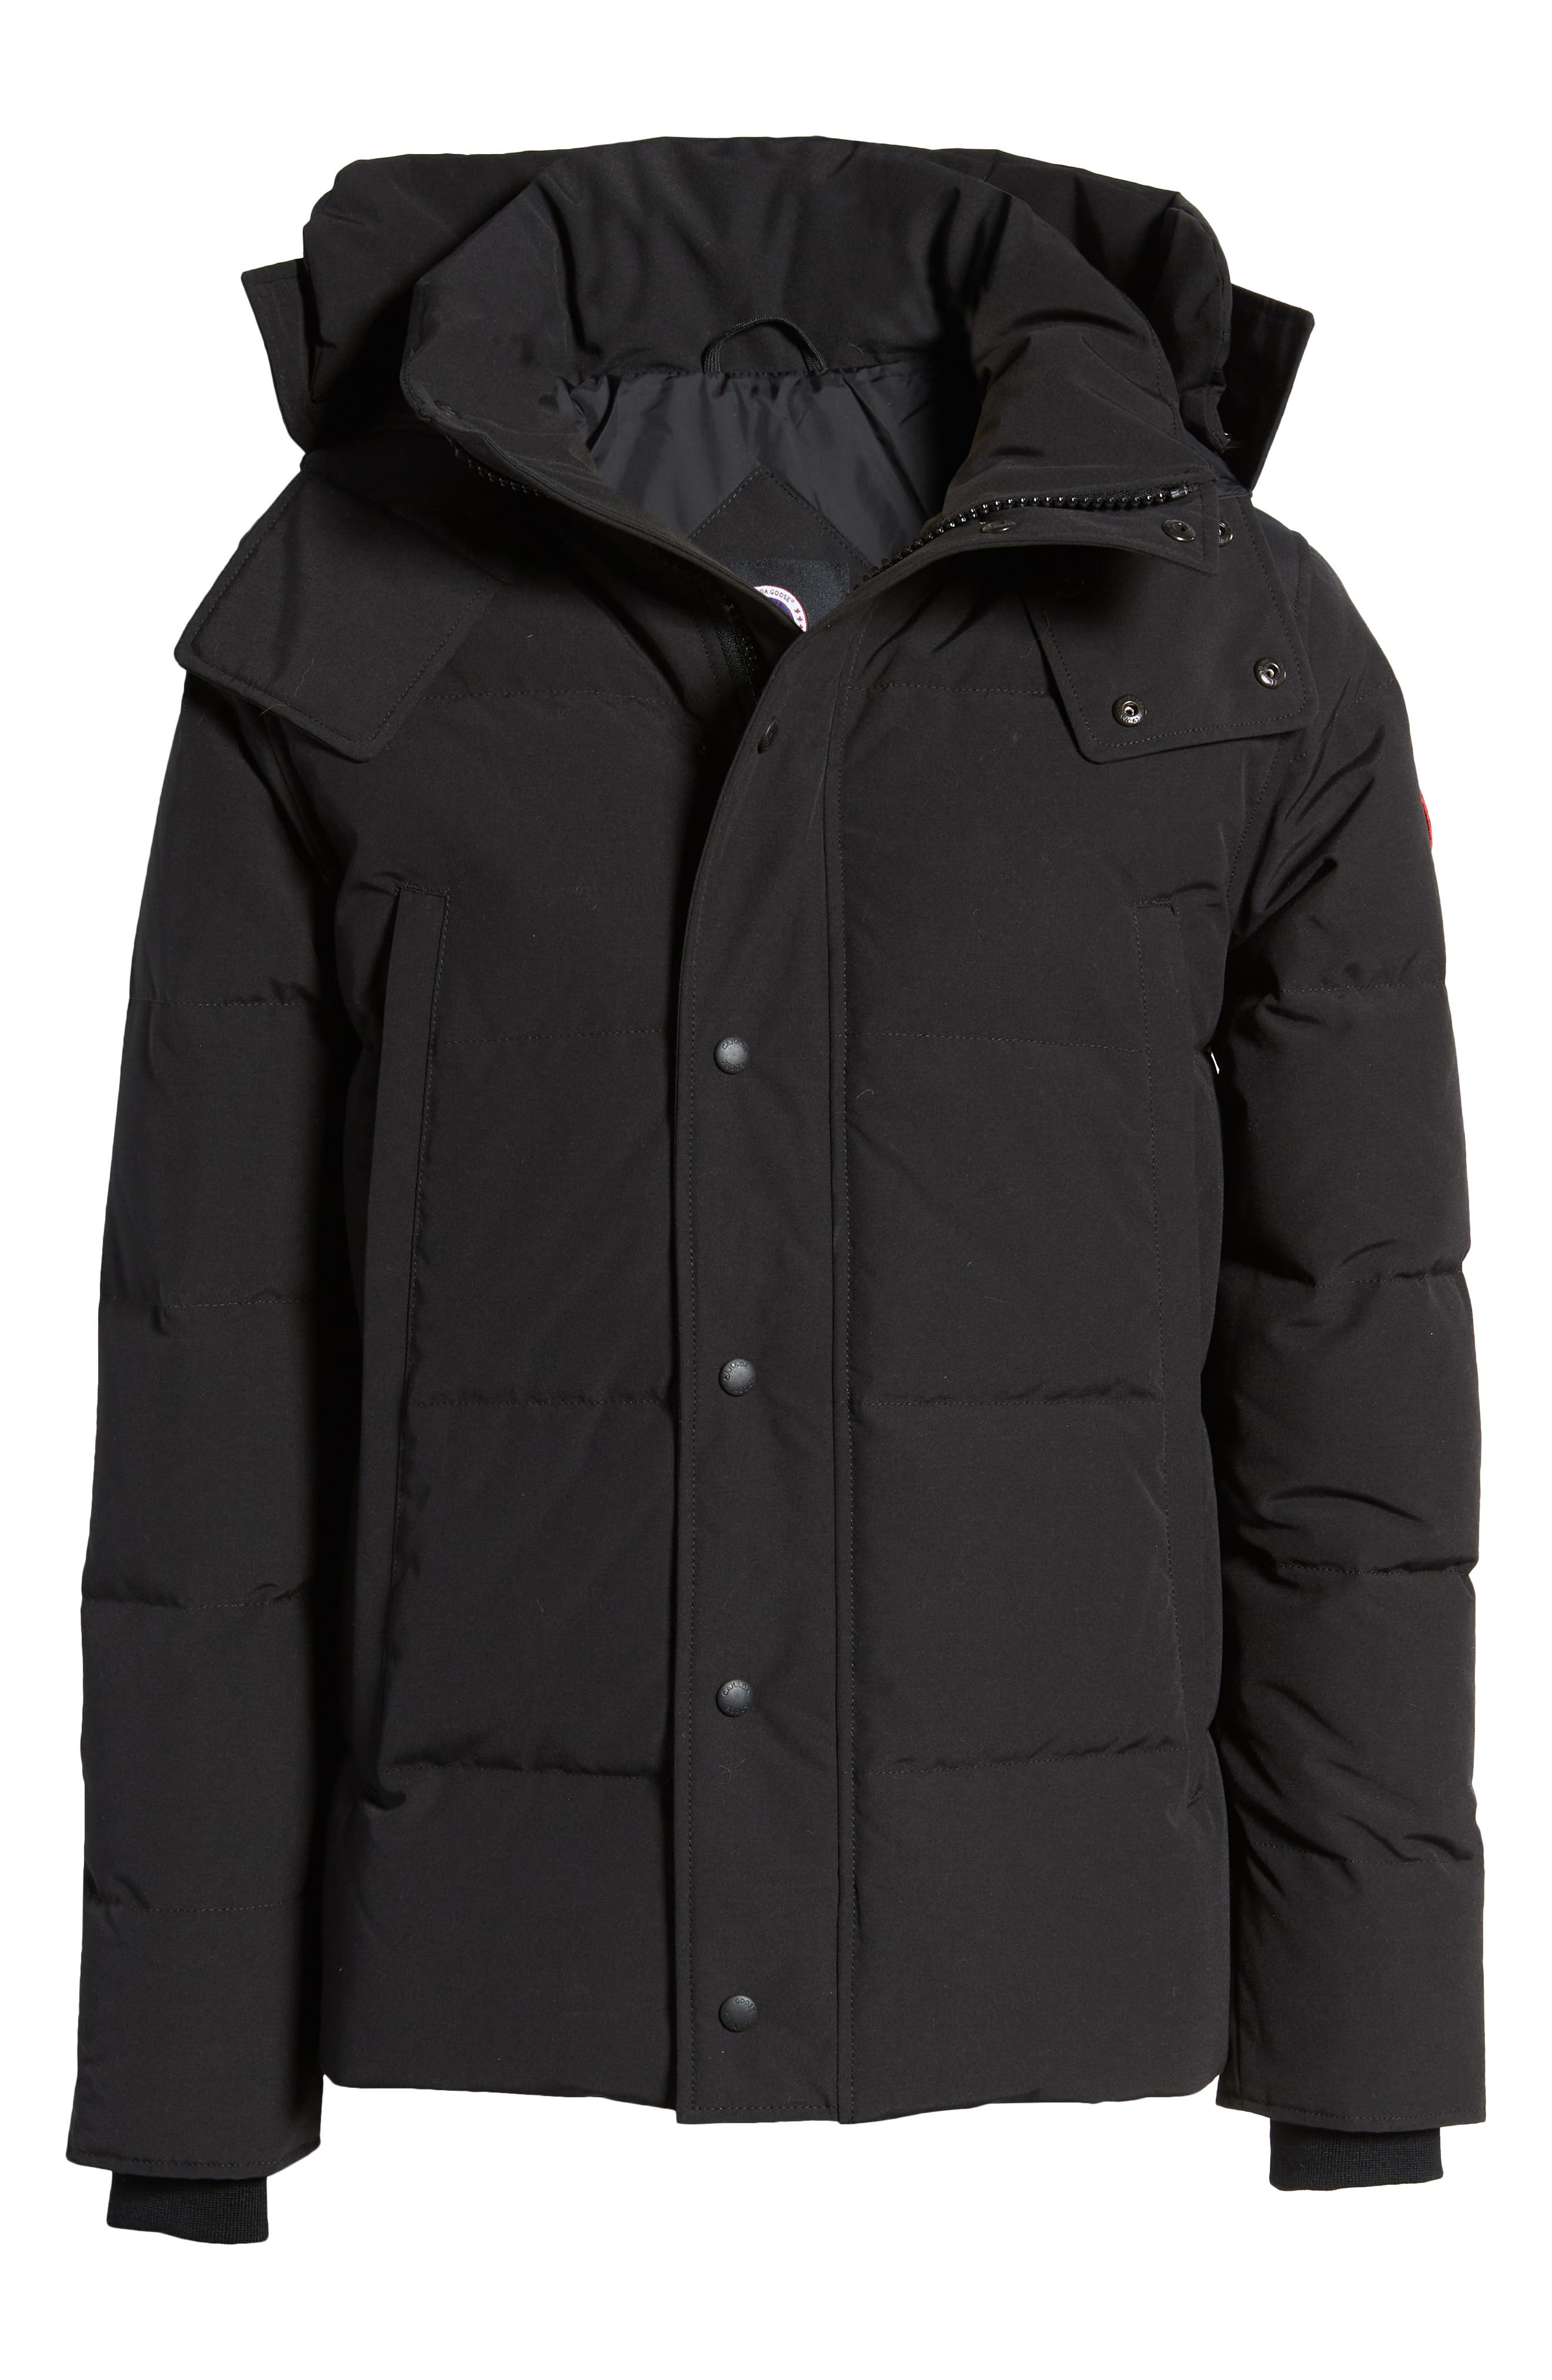 CANADA GOOSE Wyndham Arctic Tech® Hooded Down Parka for Men